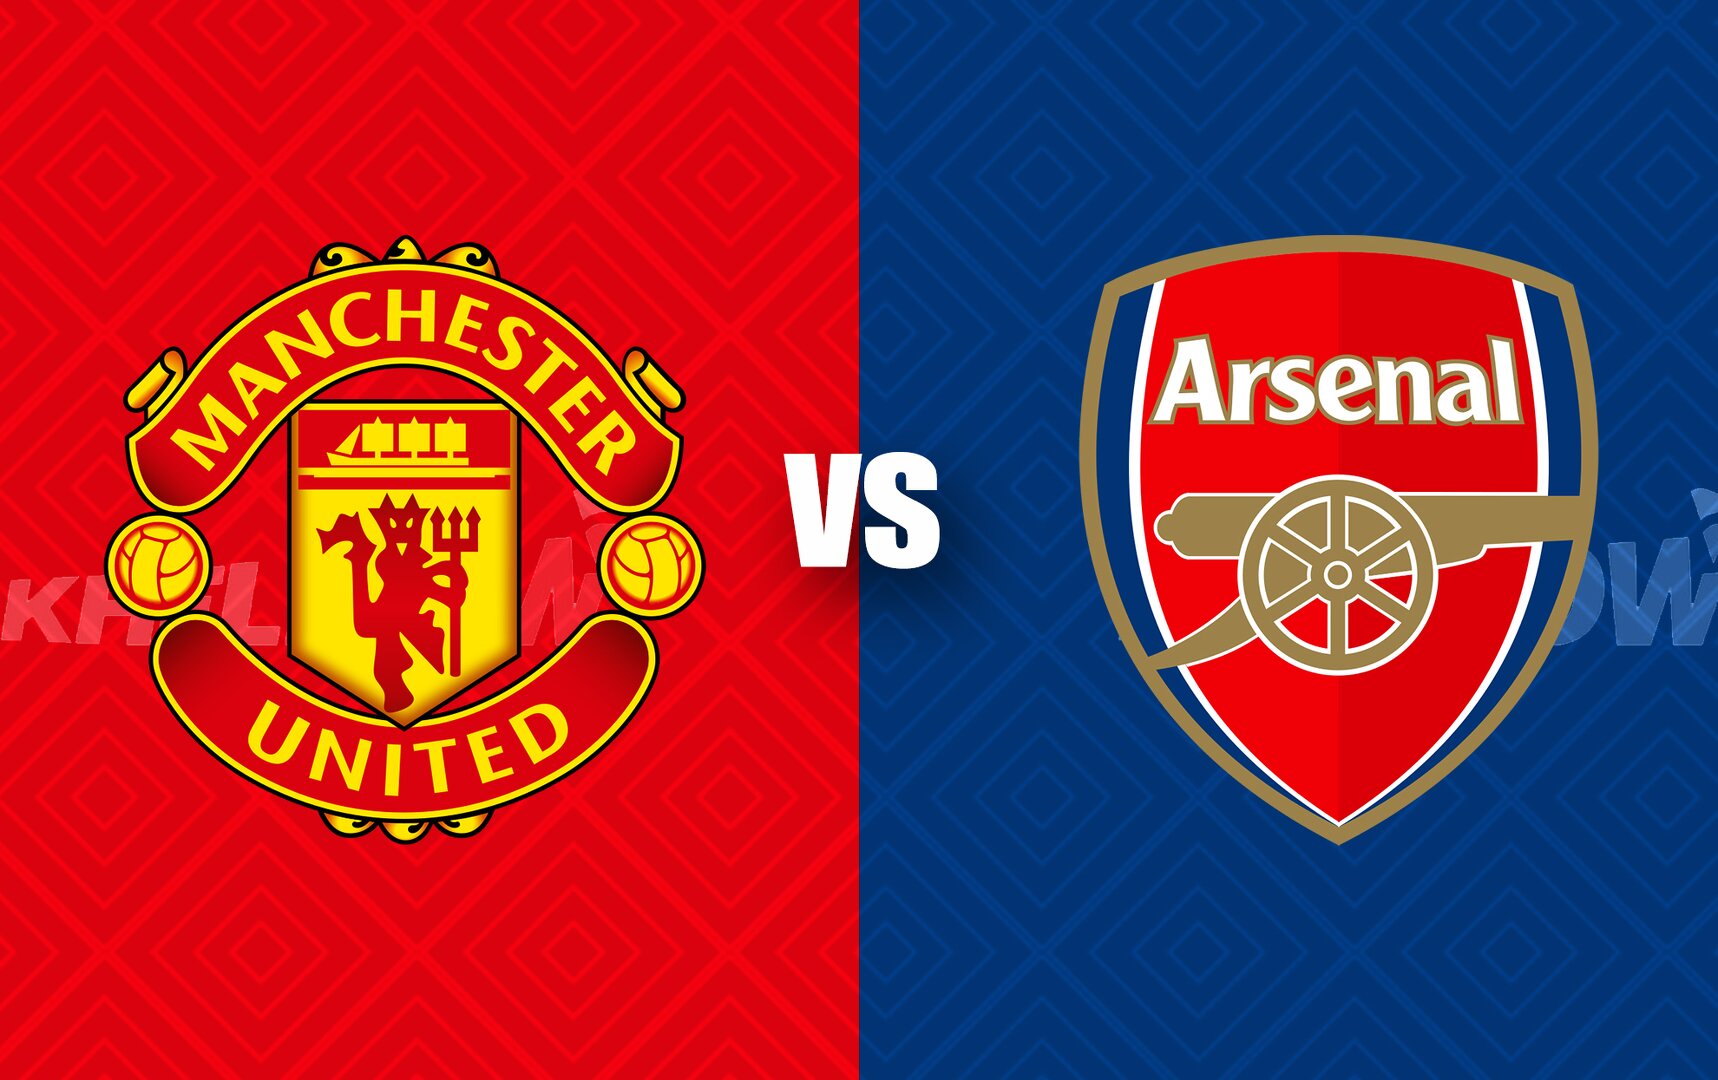 Manchester United vs Arsenal Live streaming, TV channel, kickoff time